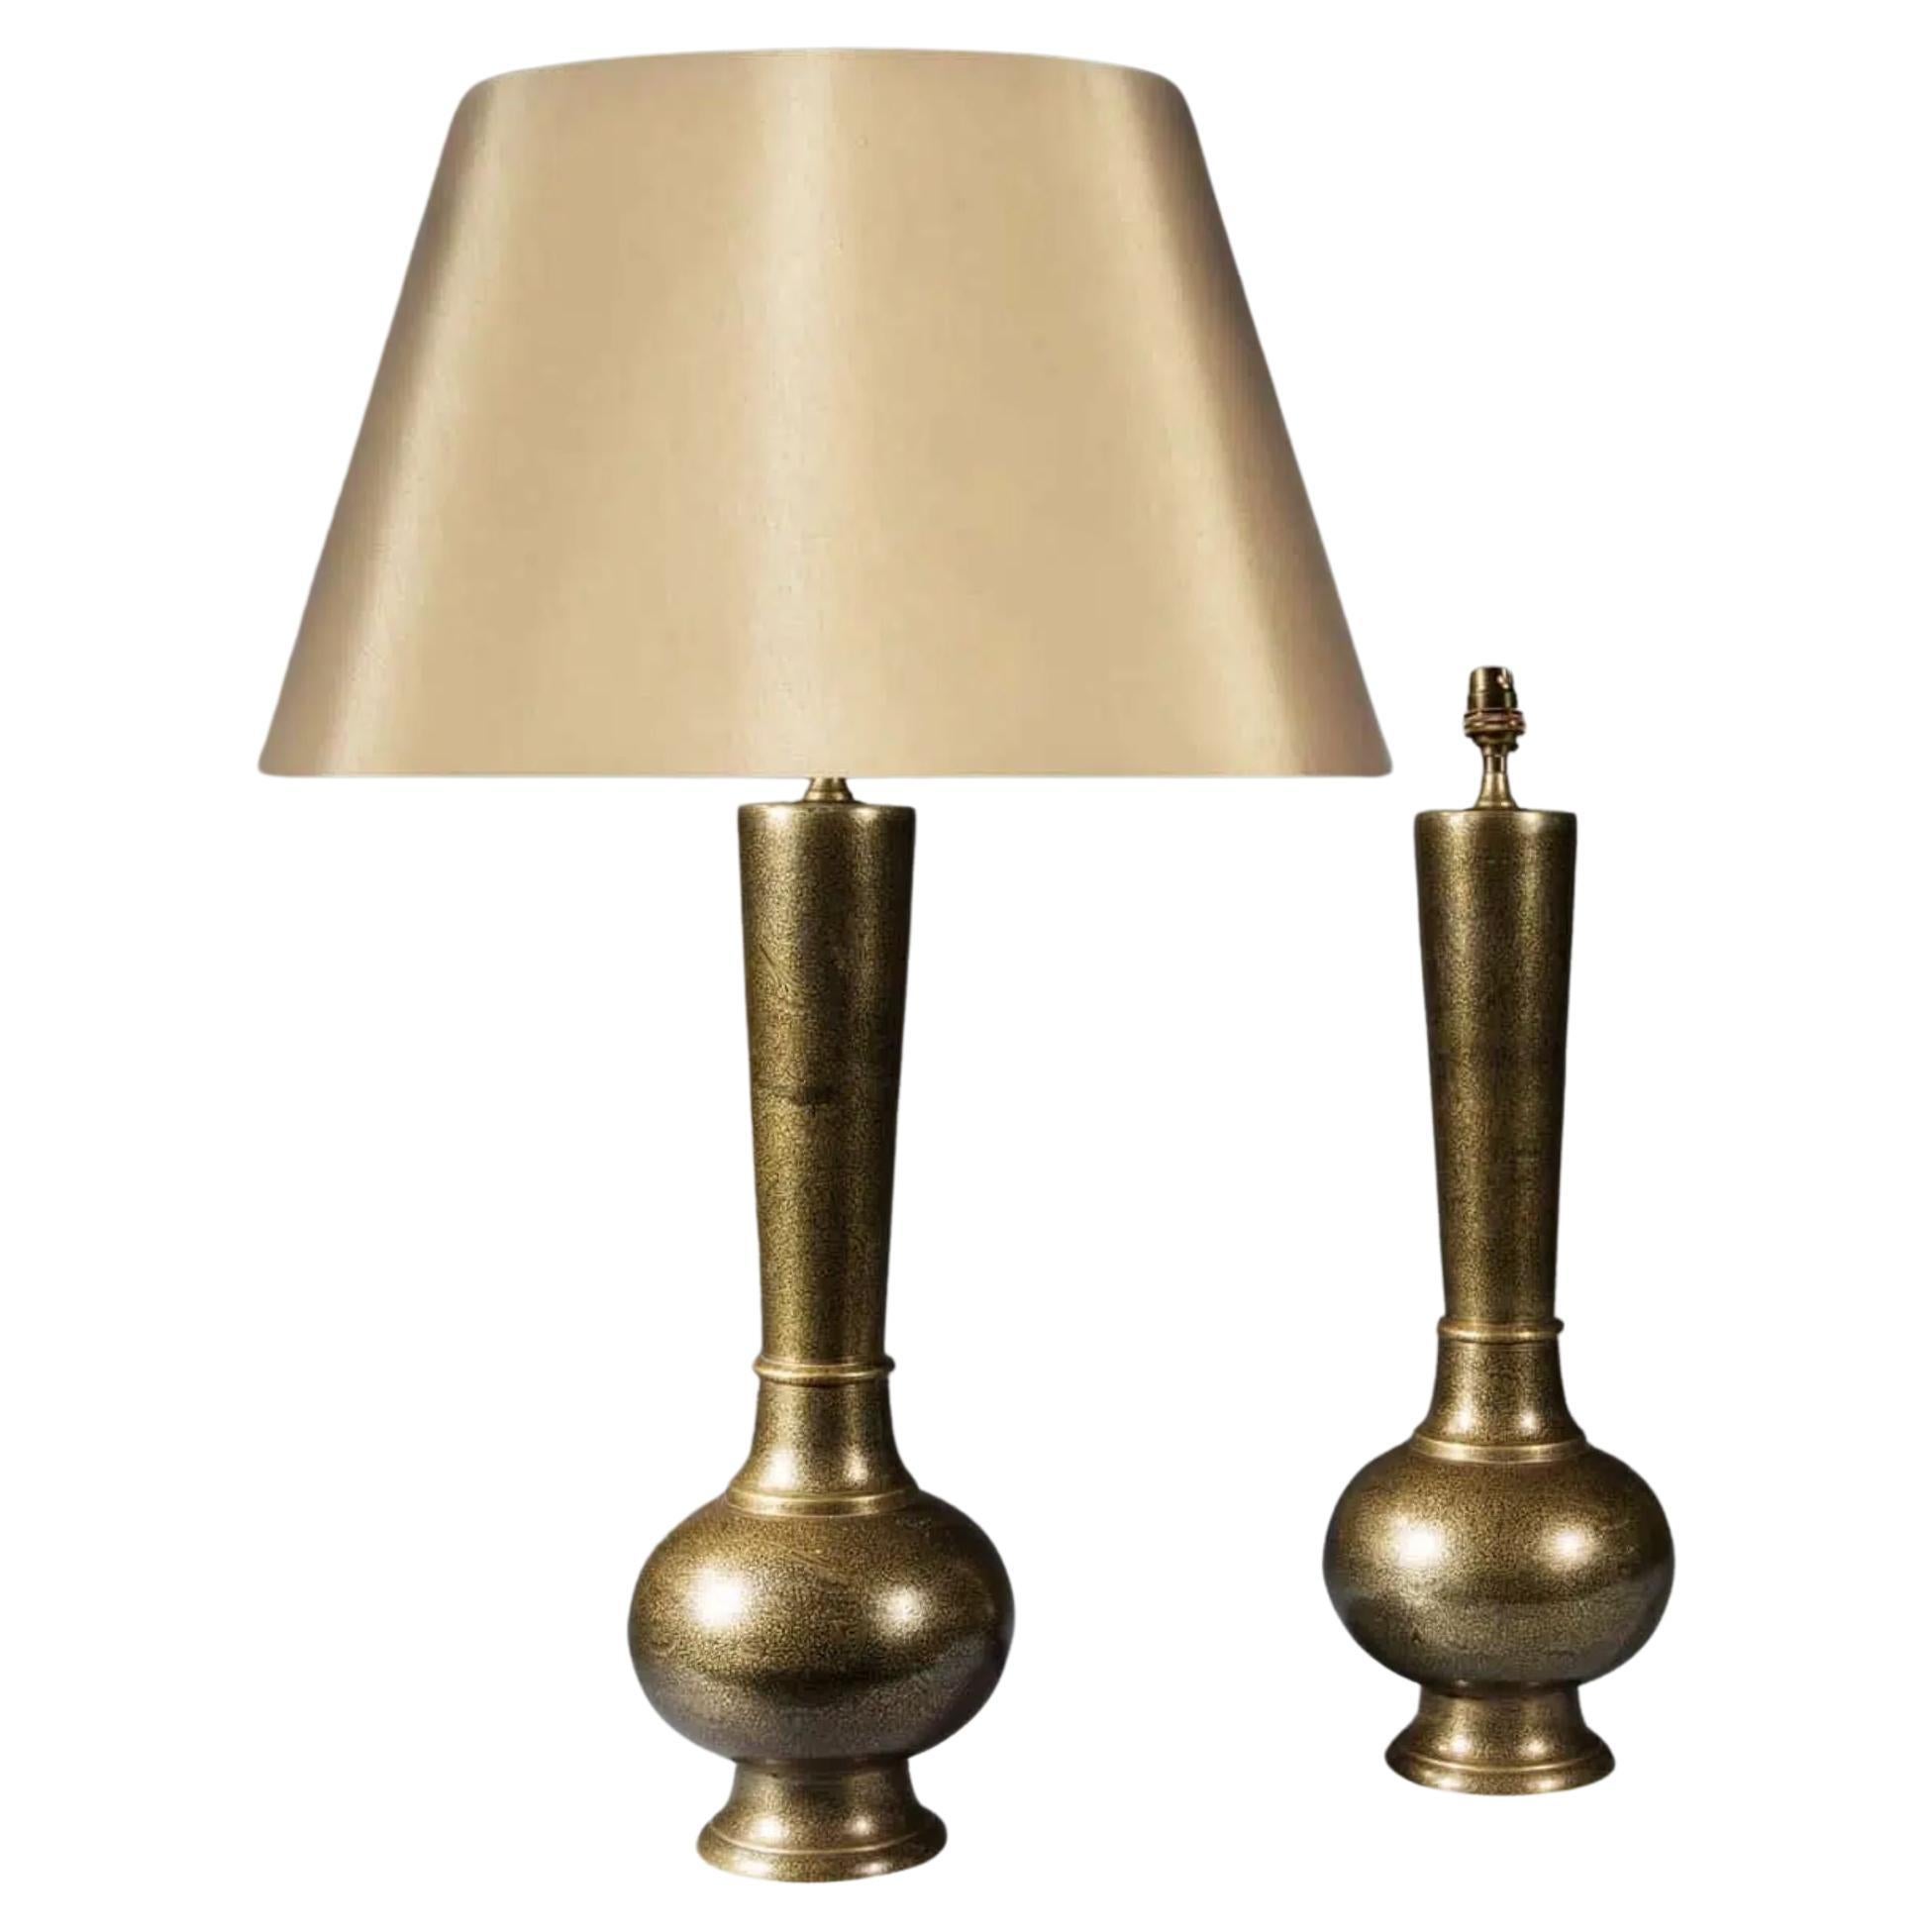 Anglo-Indian Table Lamps